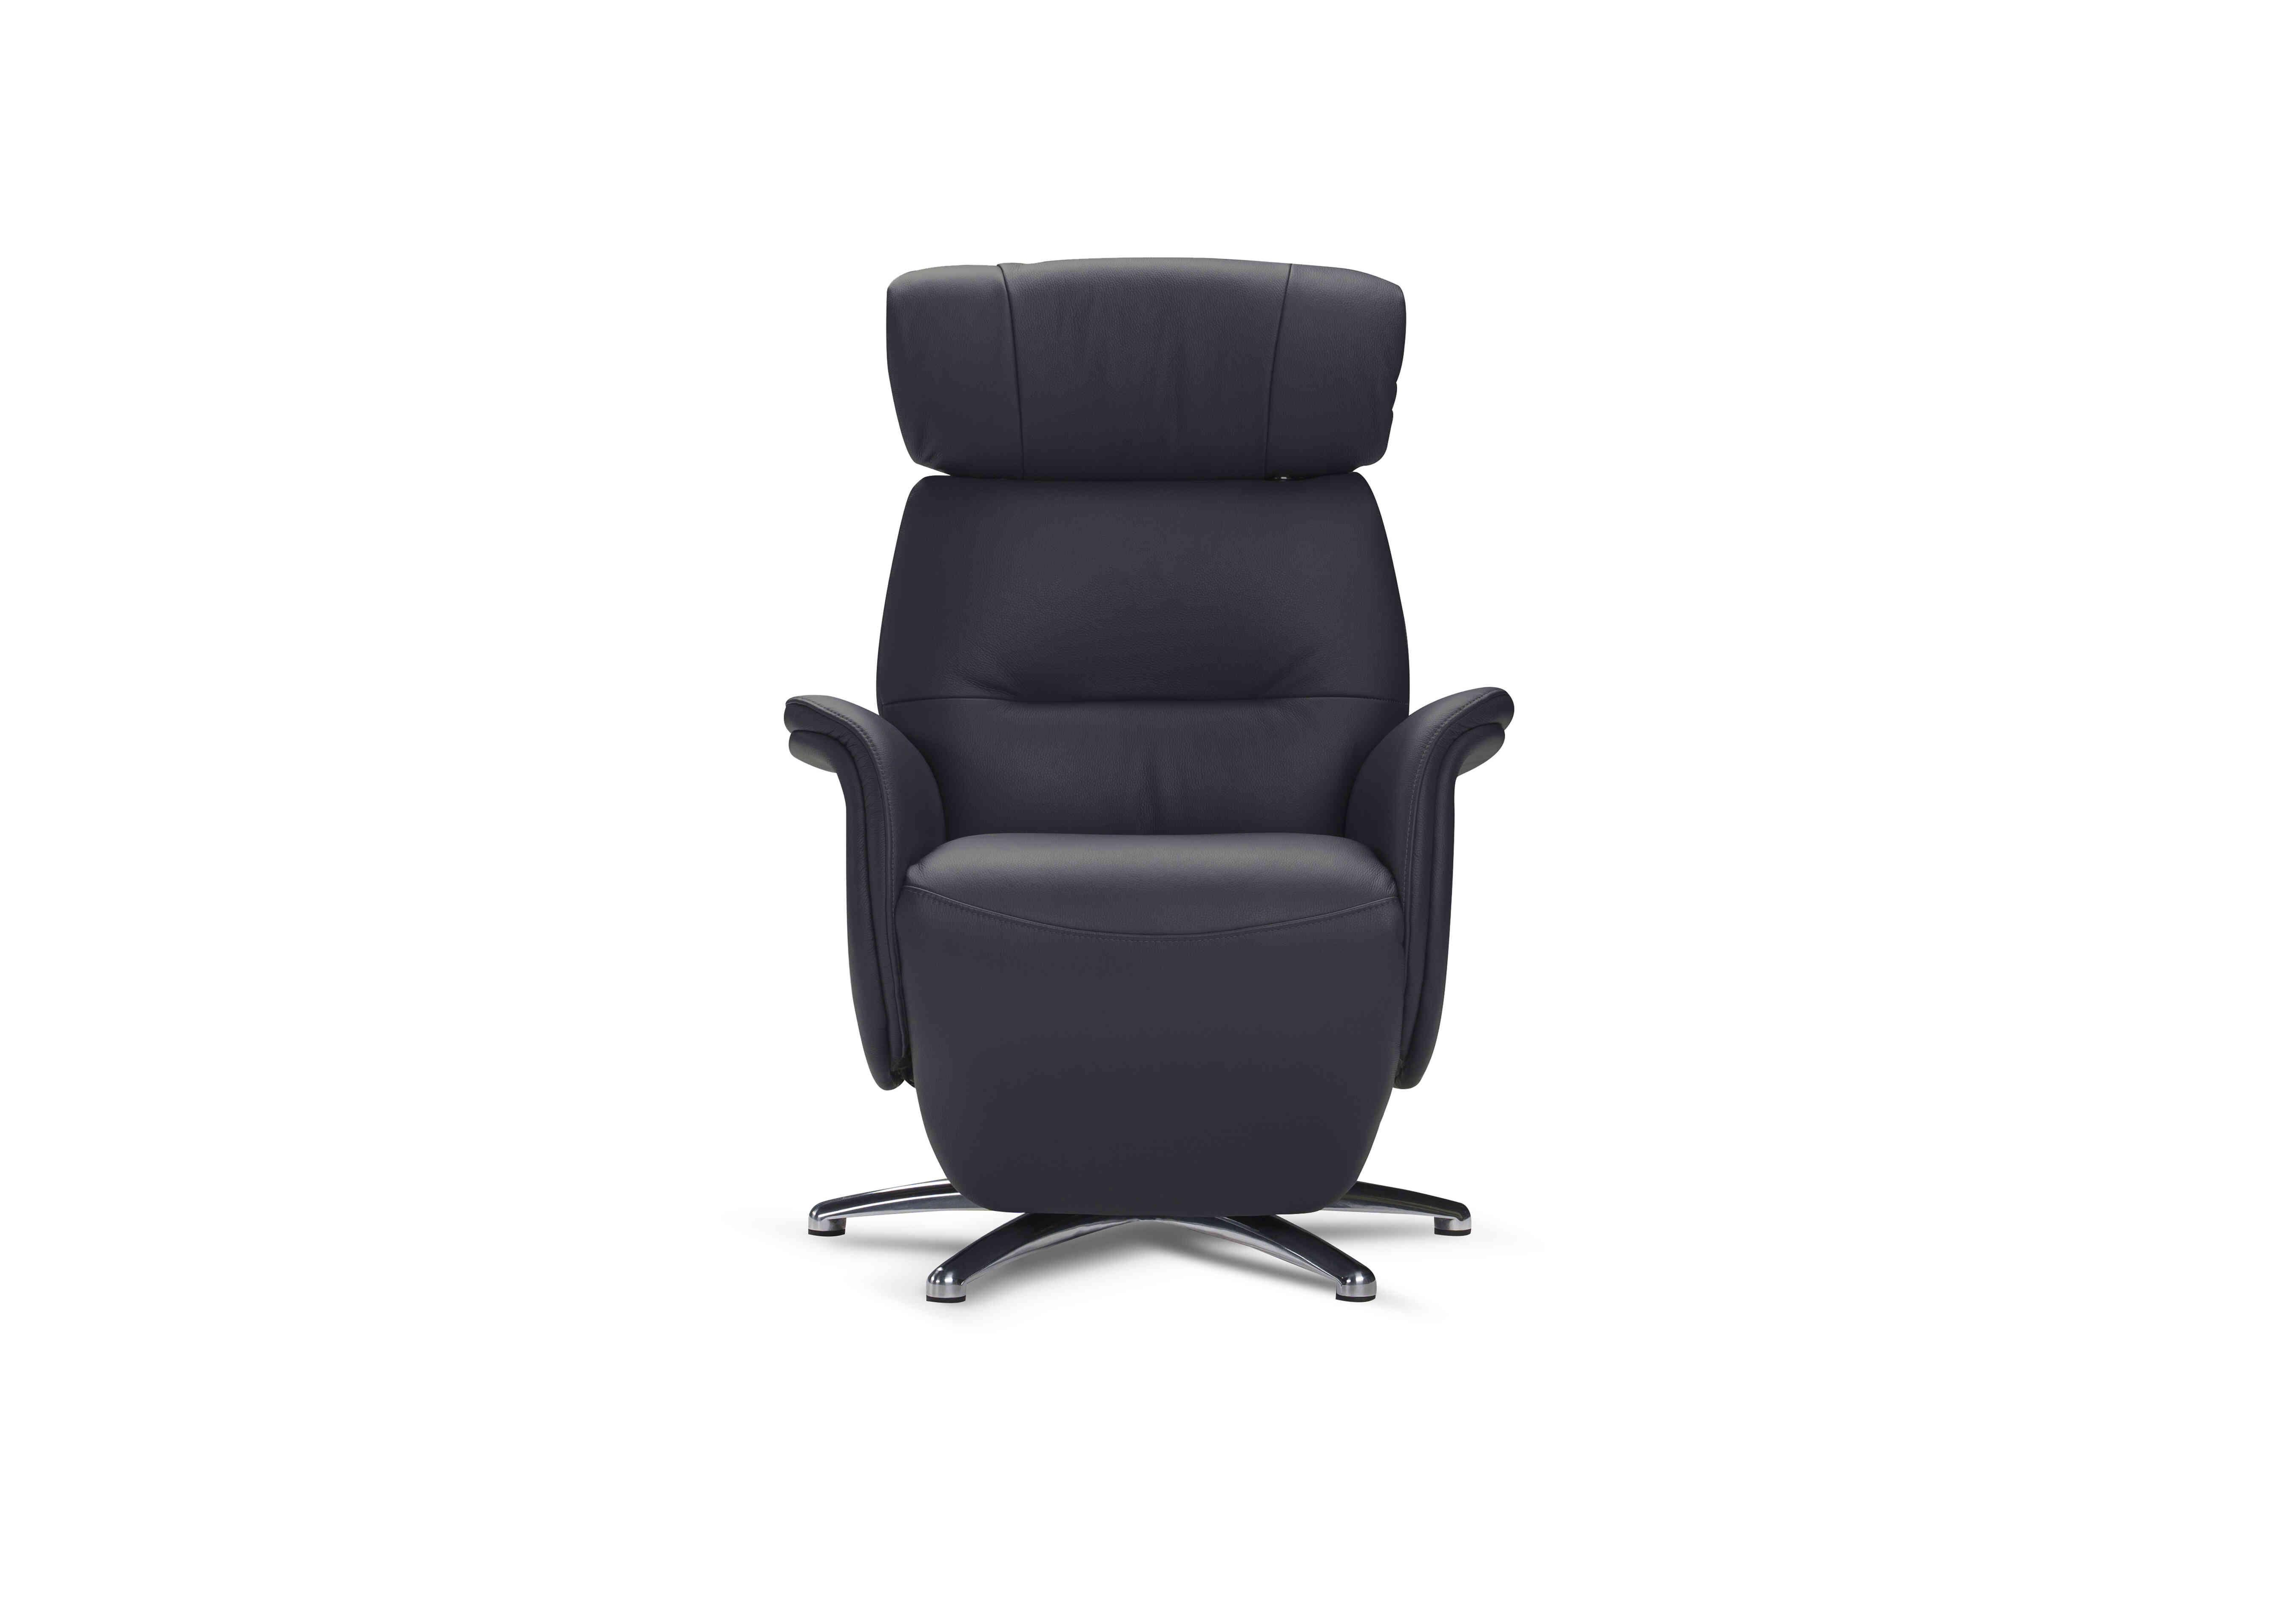 Tricolour Vincenzo Leather Swivel Power Recliner Chair in Torello 81 Blu-S Sa Ft on Furniture Village